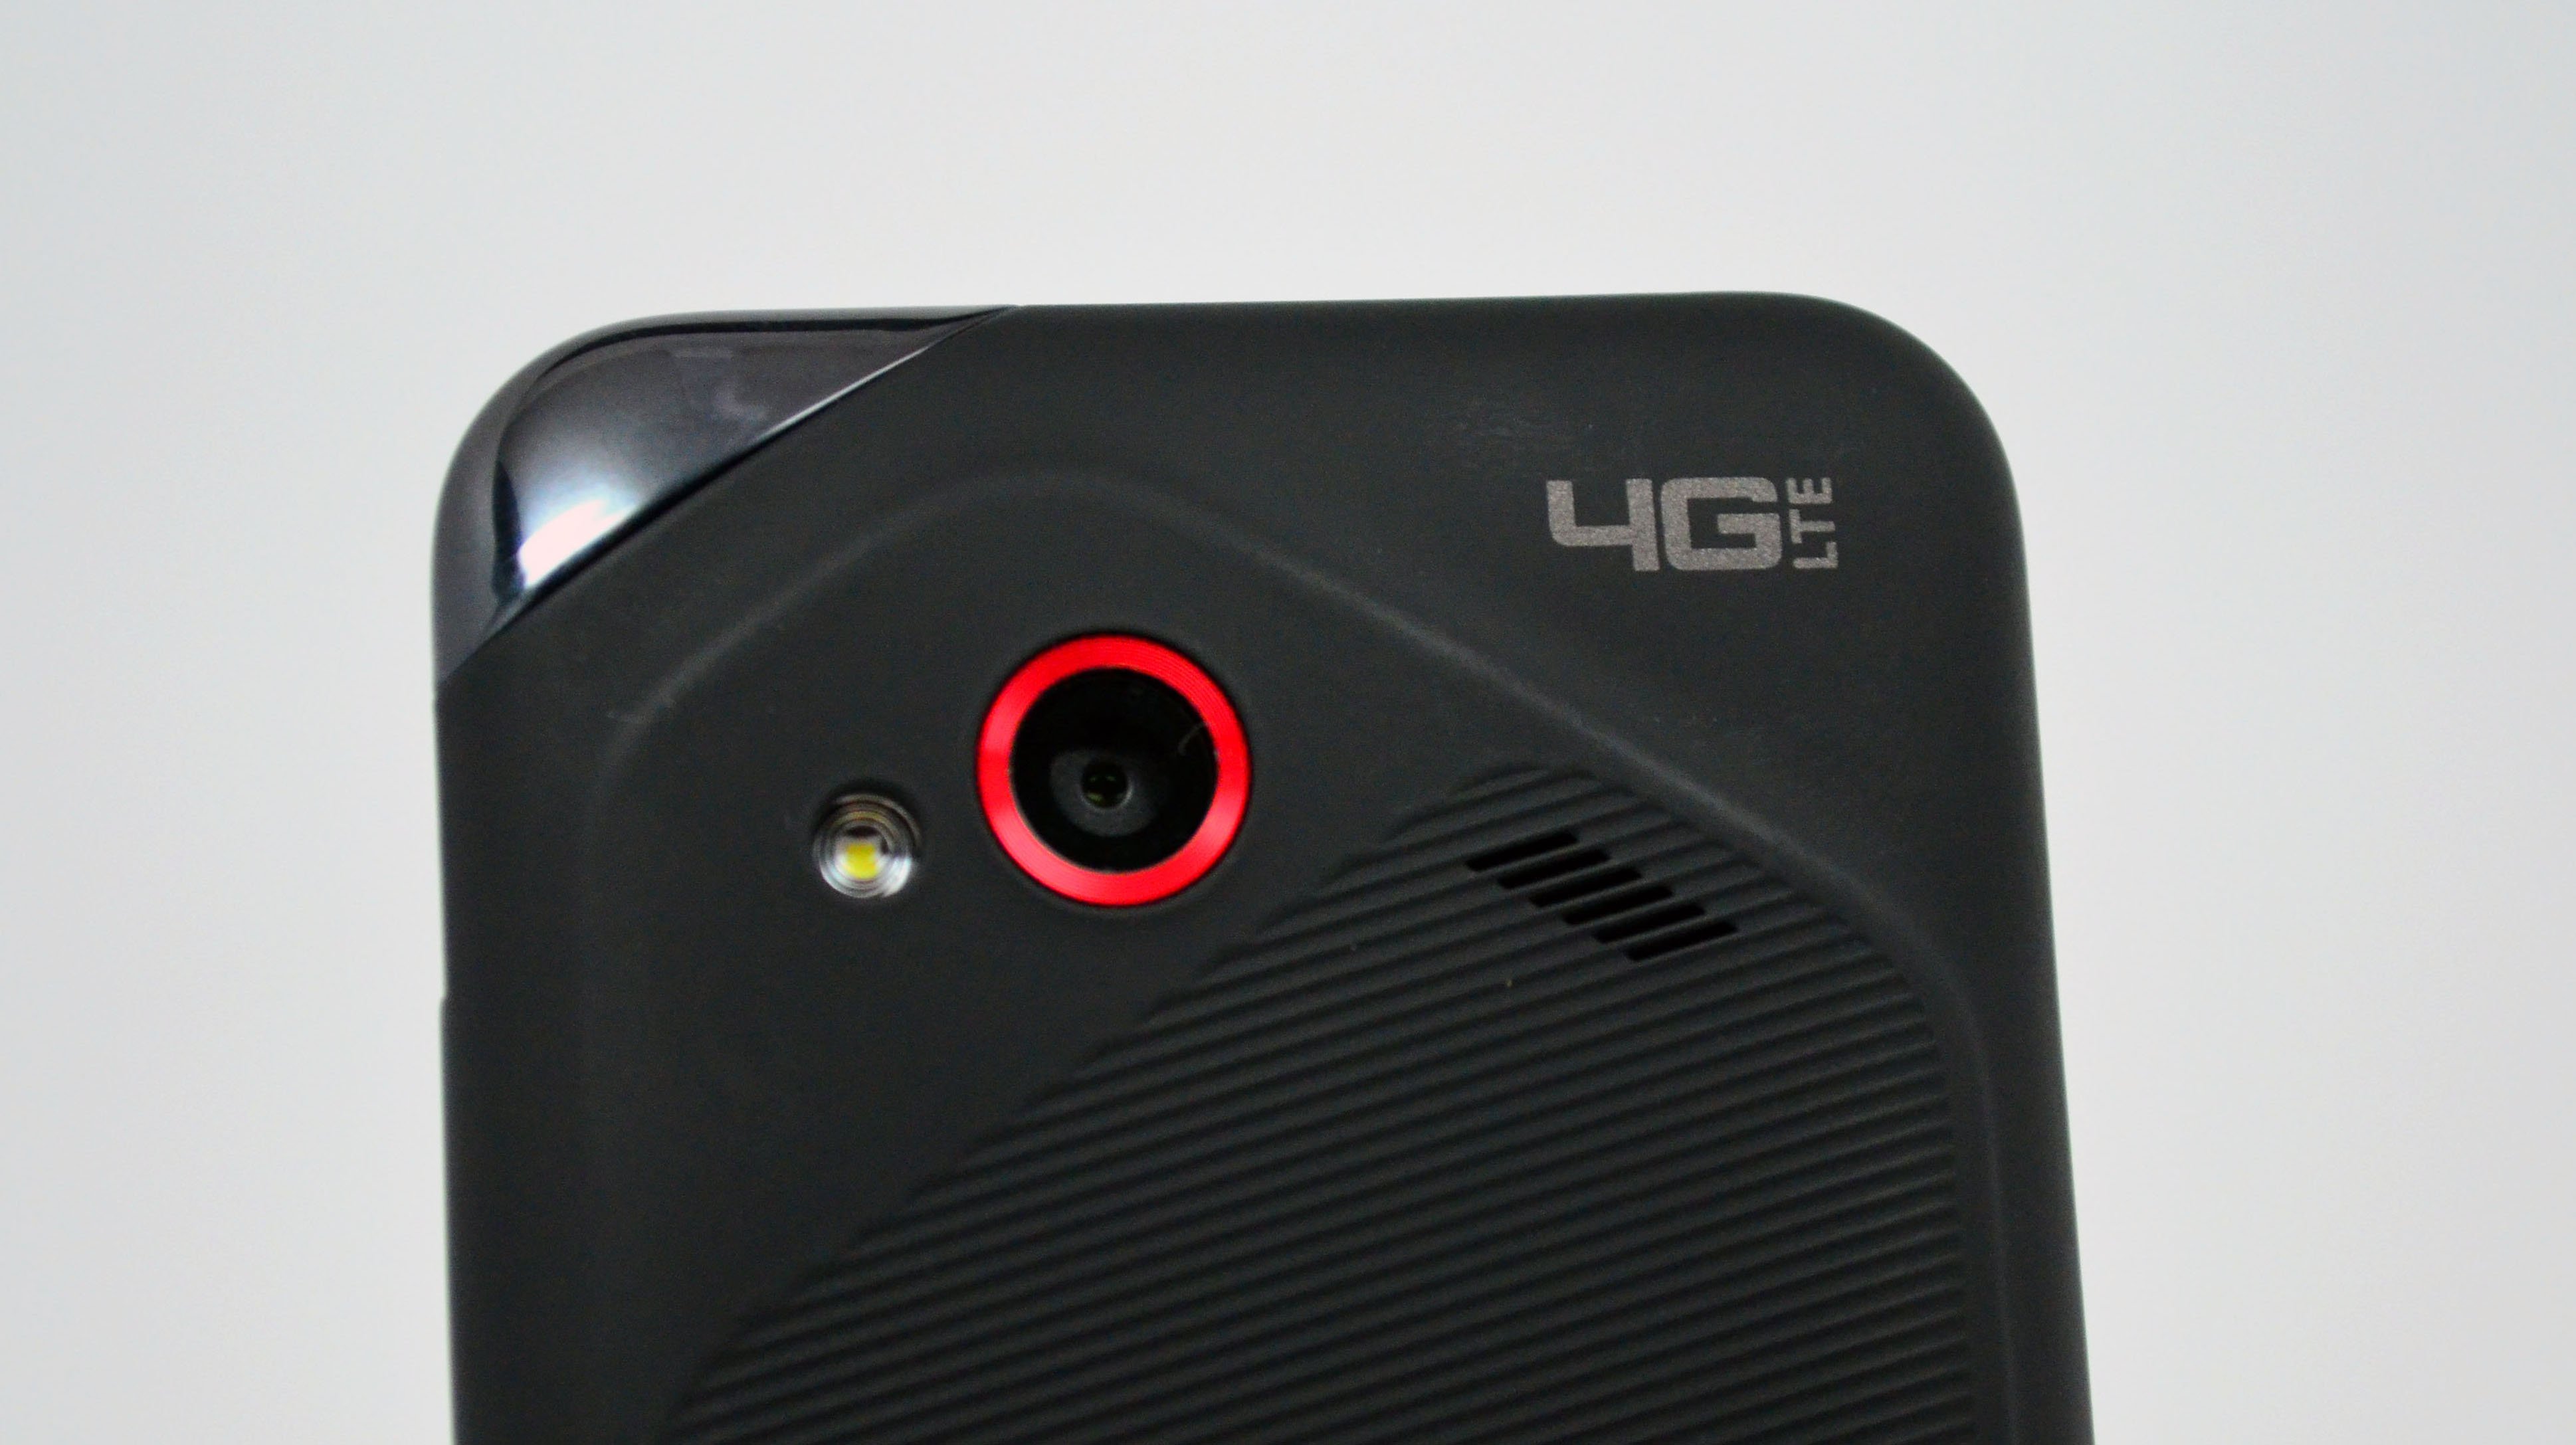 Droid Incredible 4G LTE camera